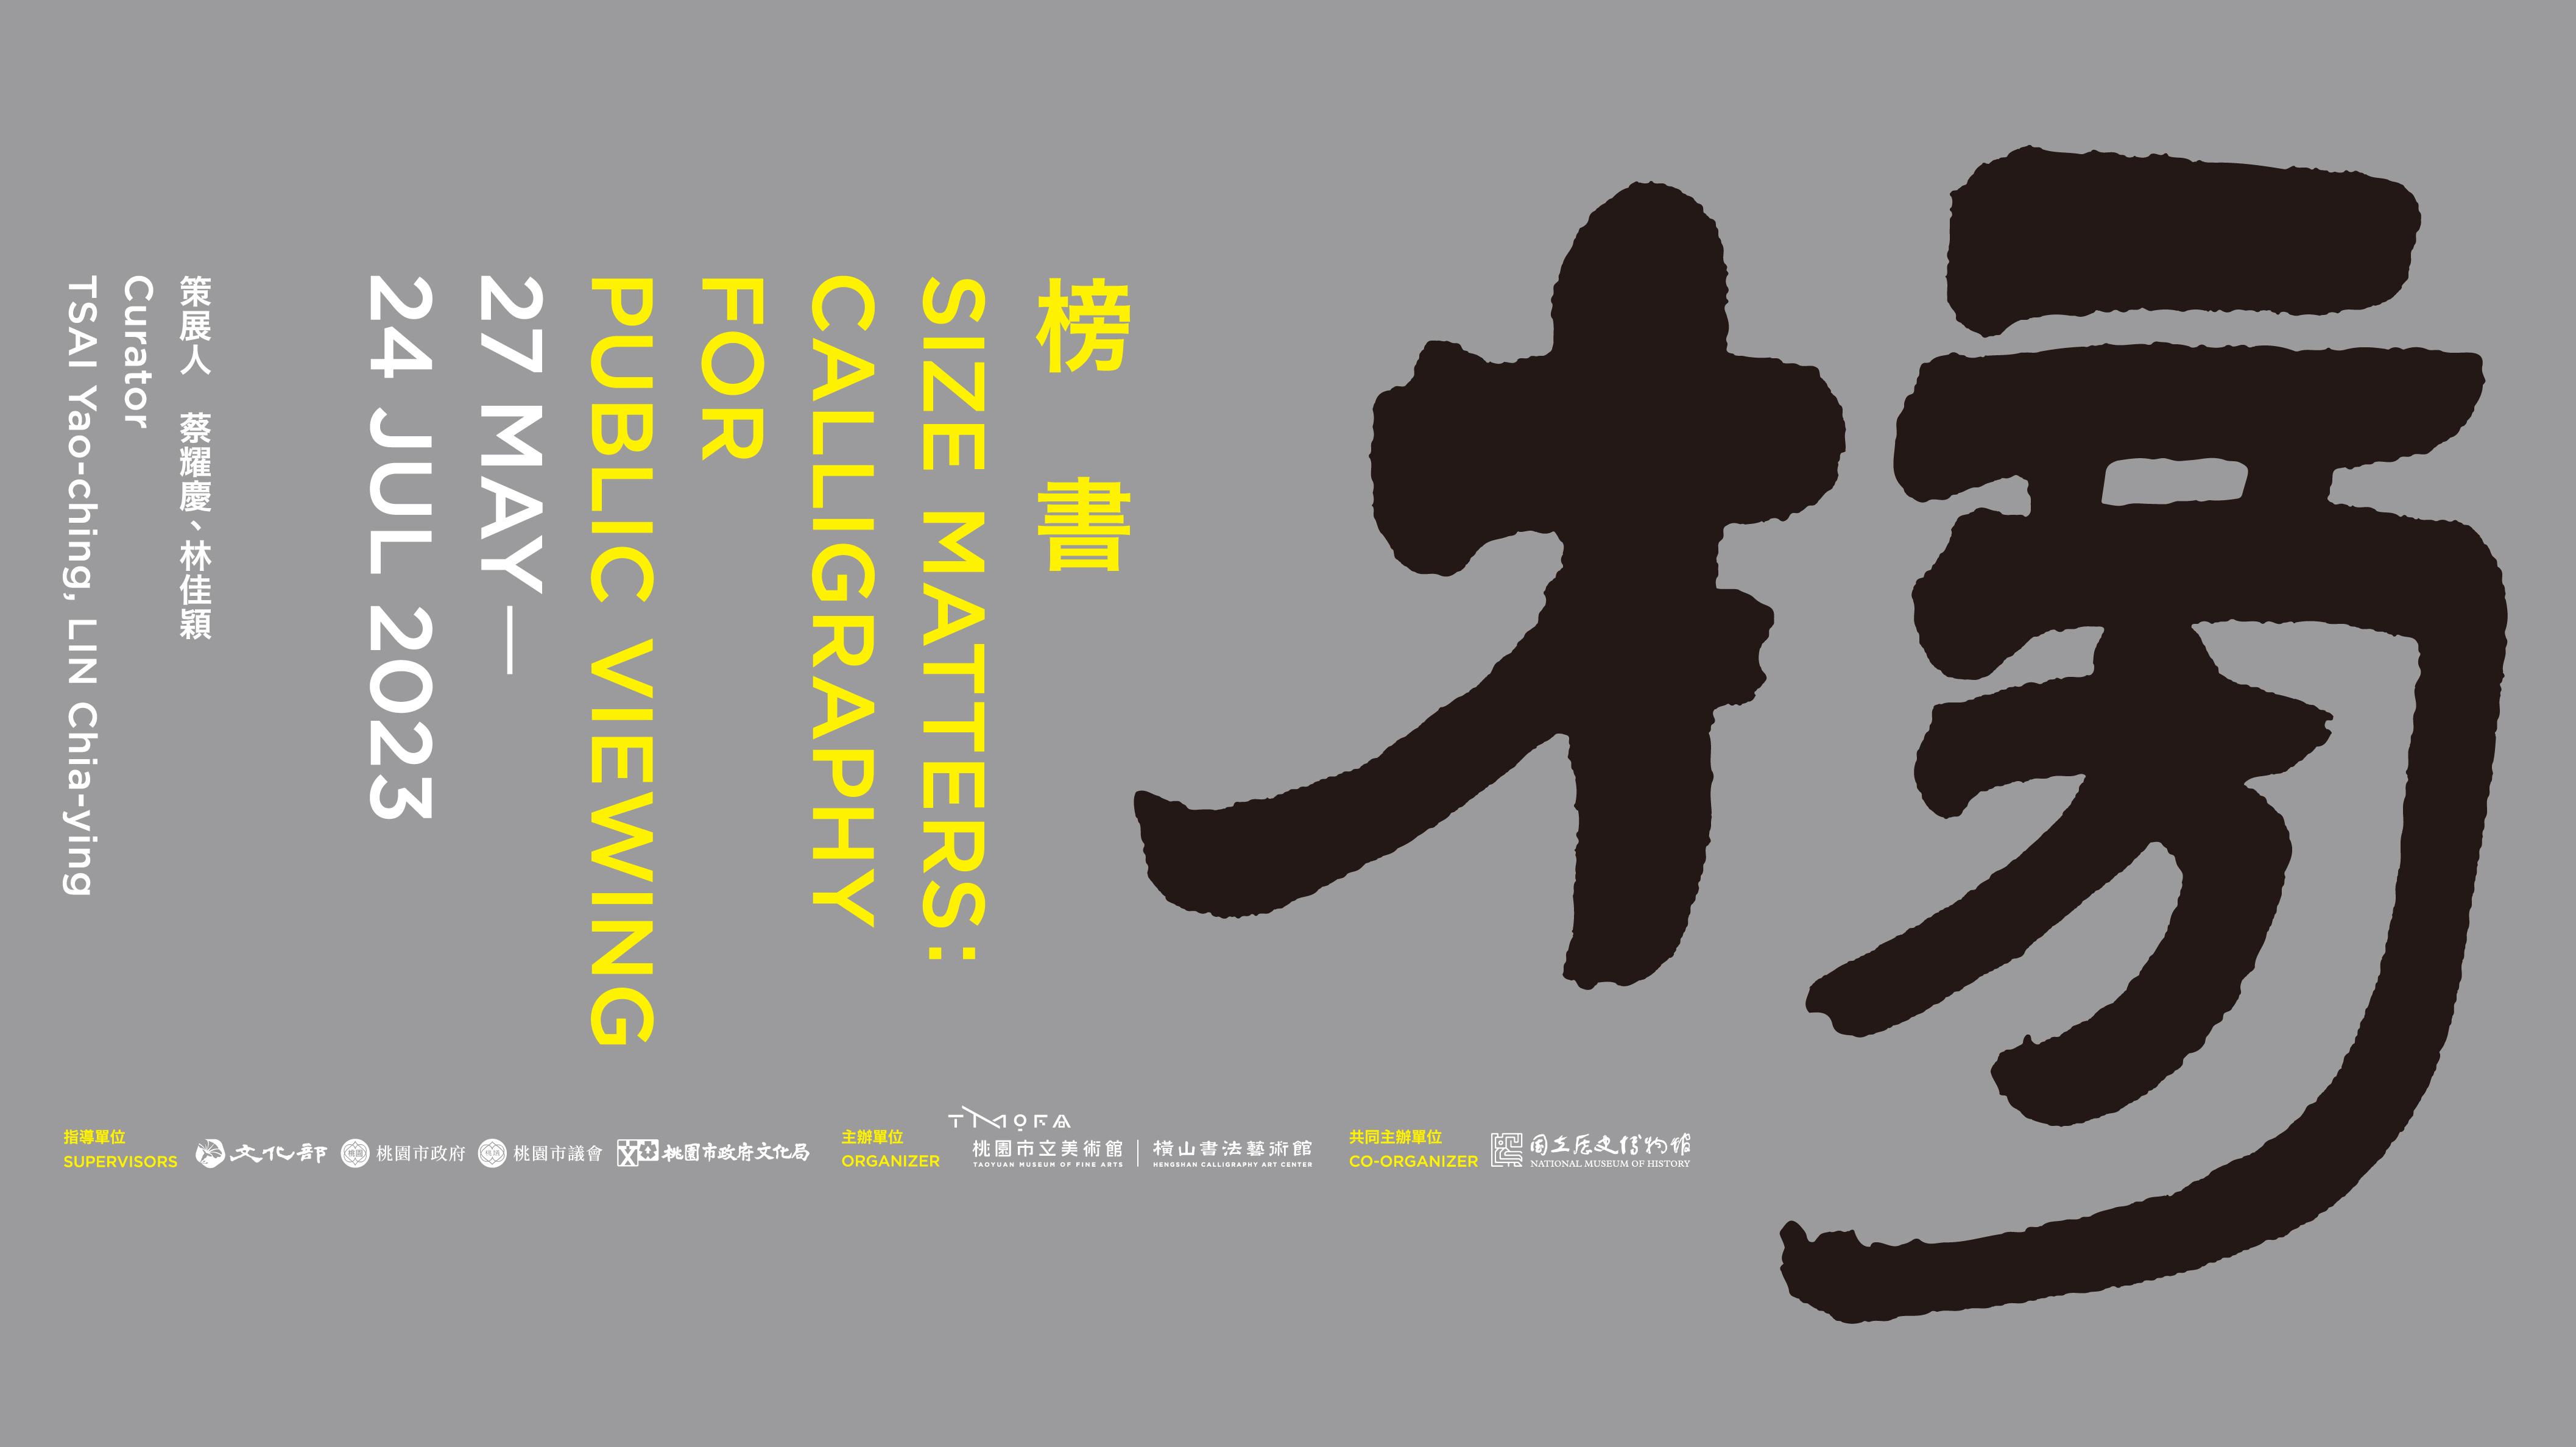 SIZE MATTERS: CALLIGRAPHY FOR PUBLIC VIEWING